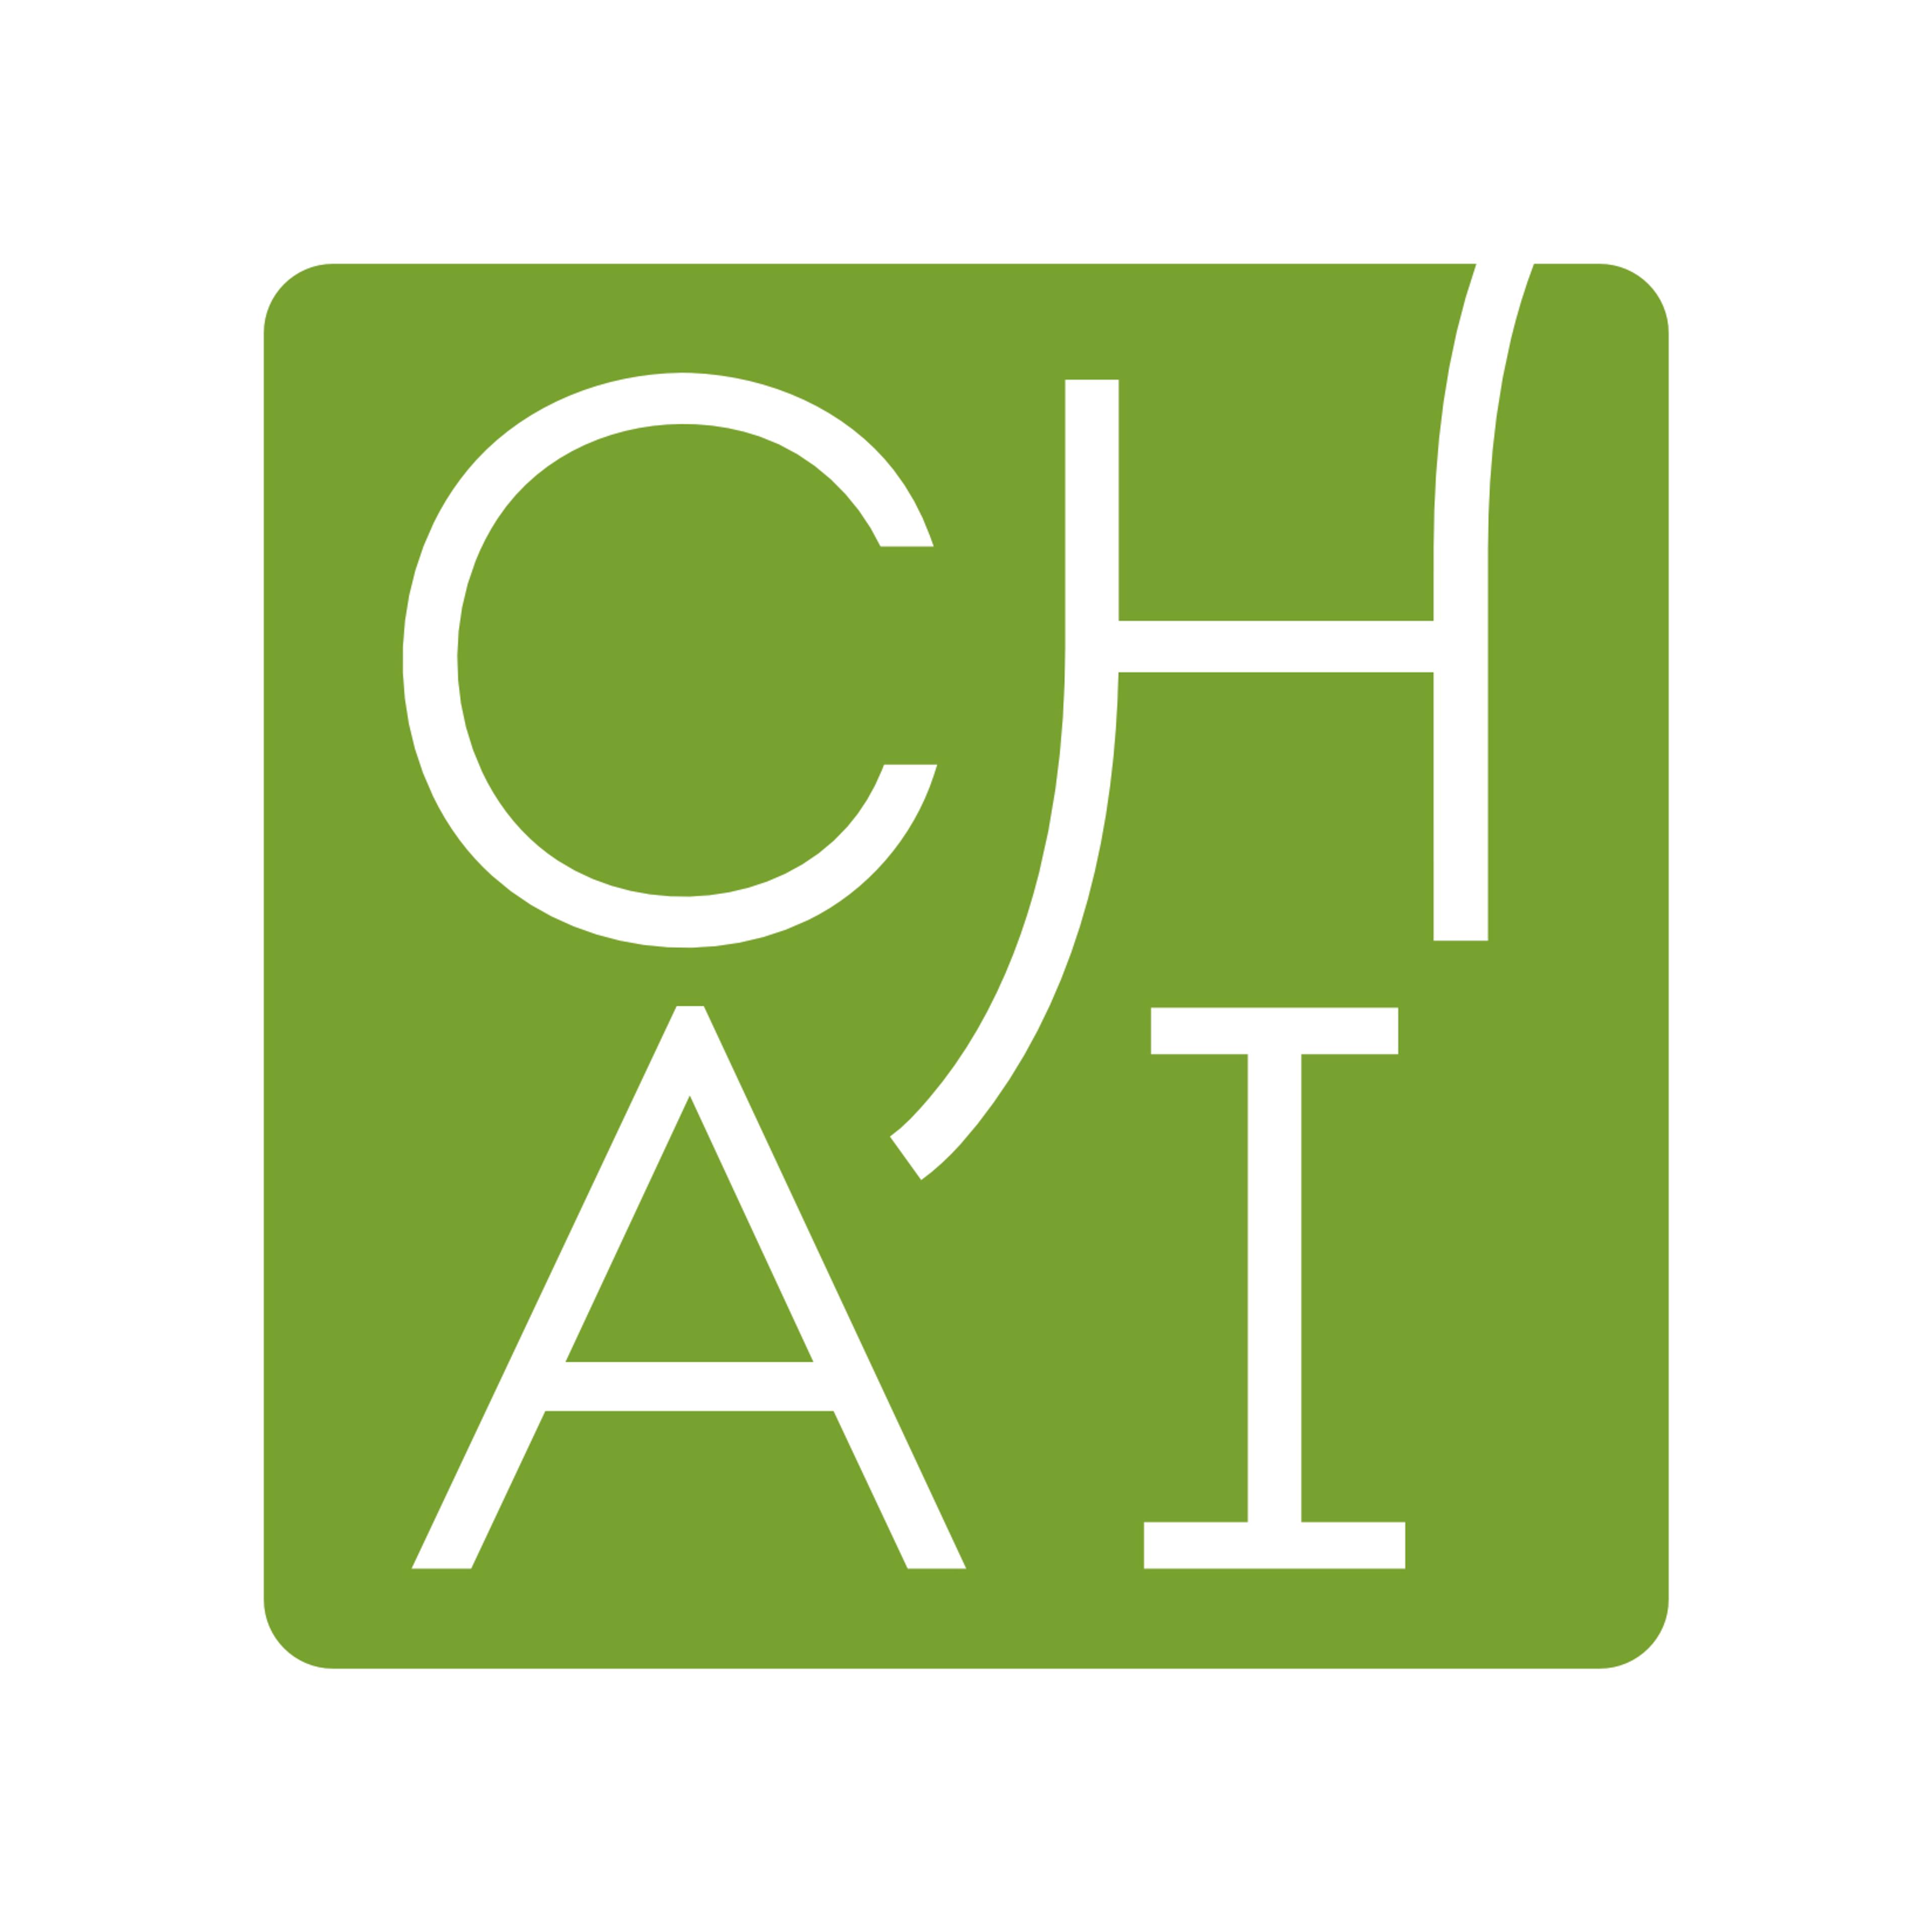 Center for Human-Compatible Artificial Intelligence (CHAI)